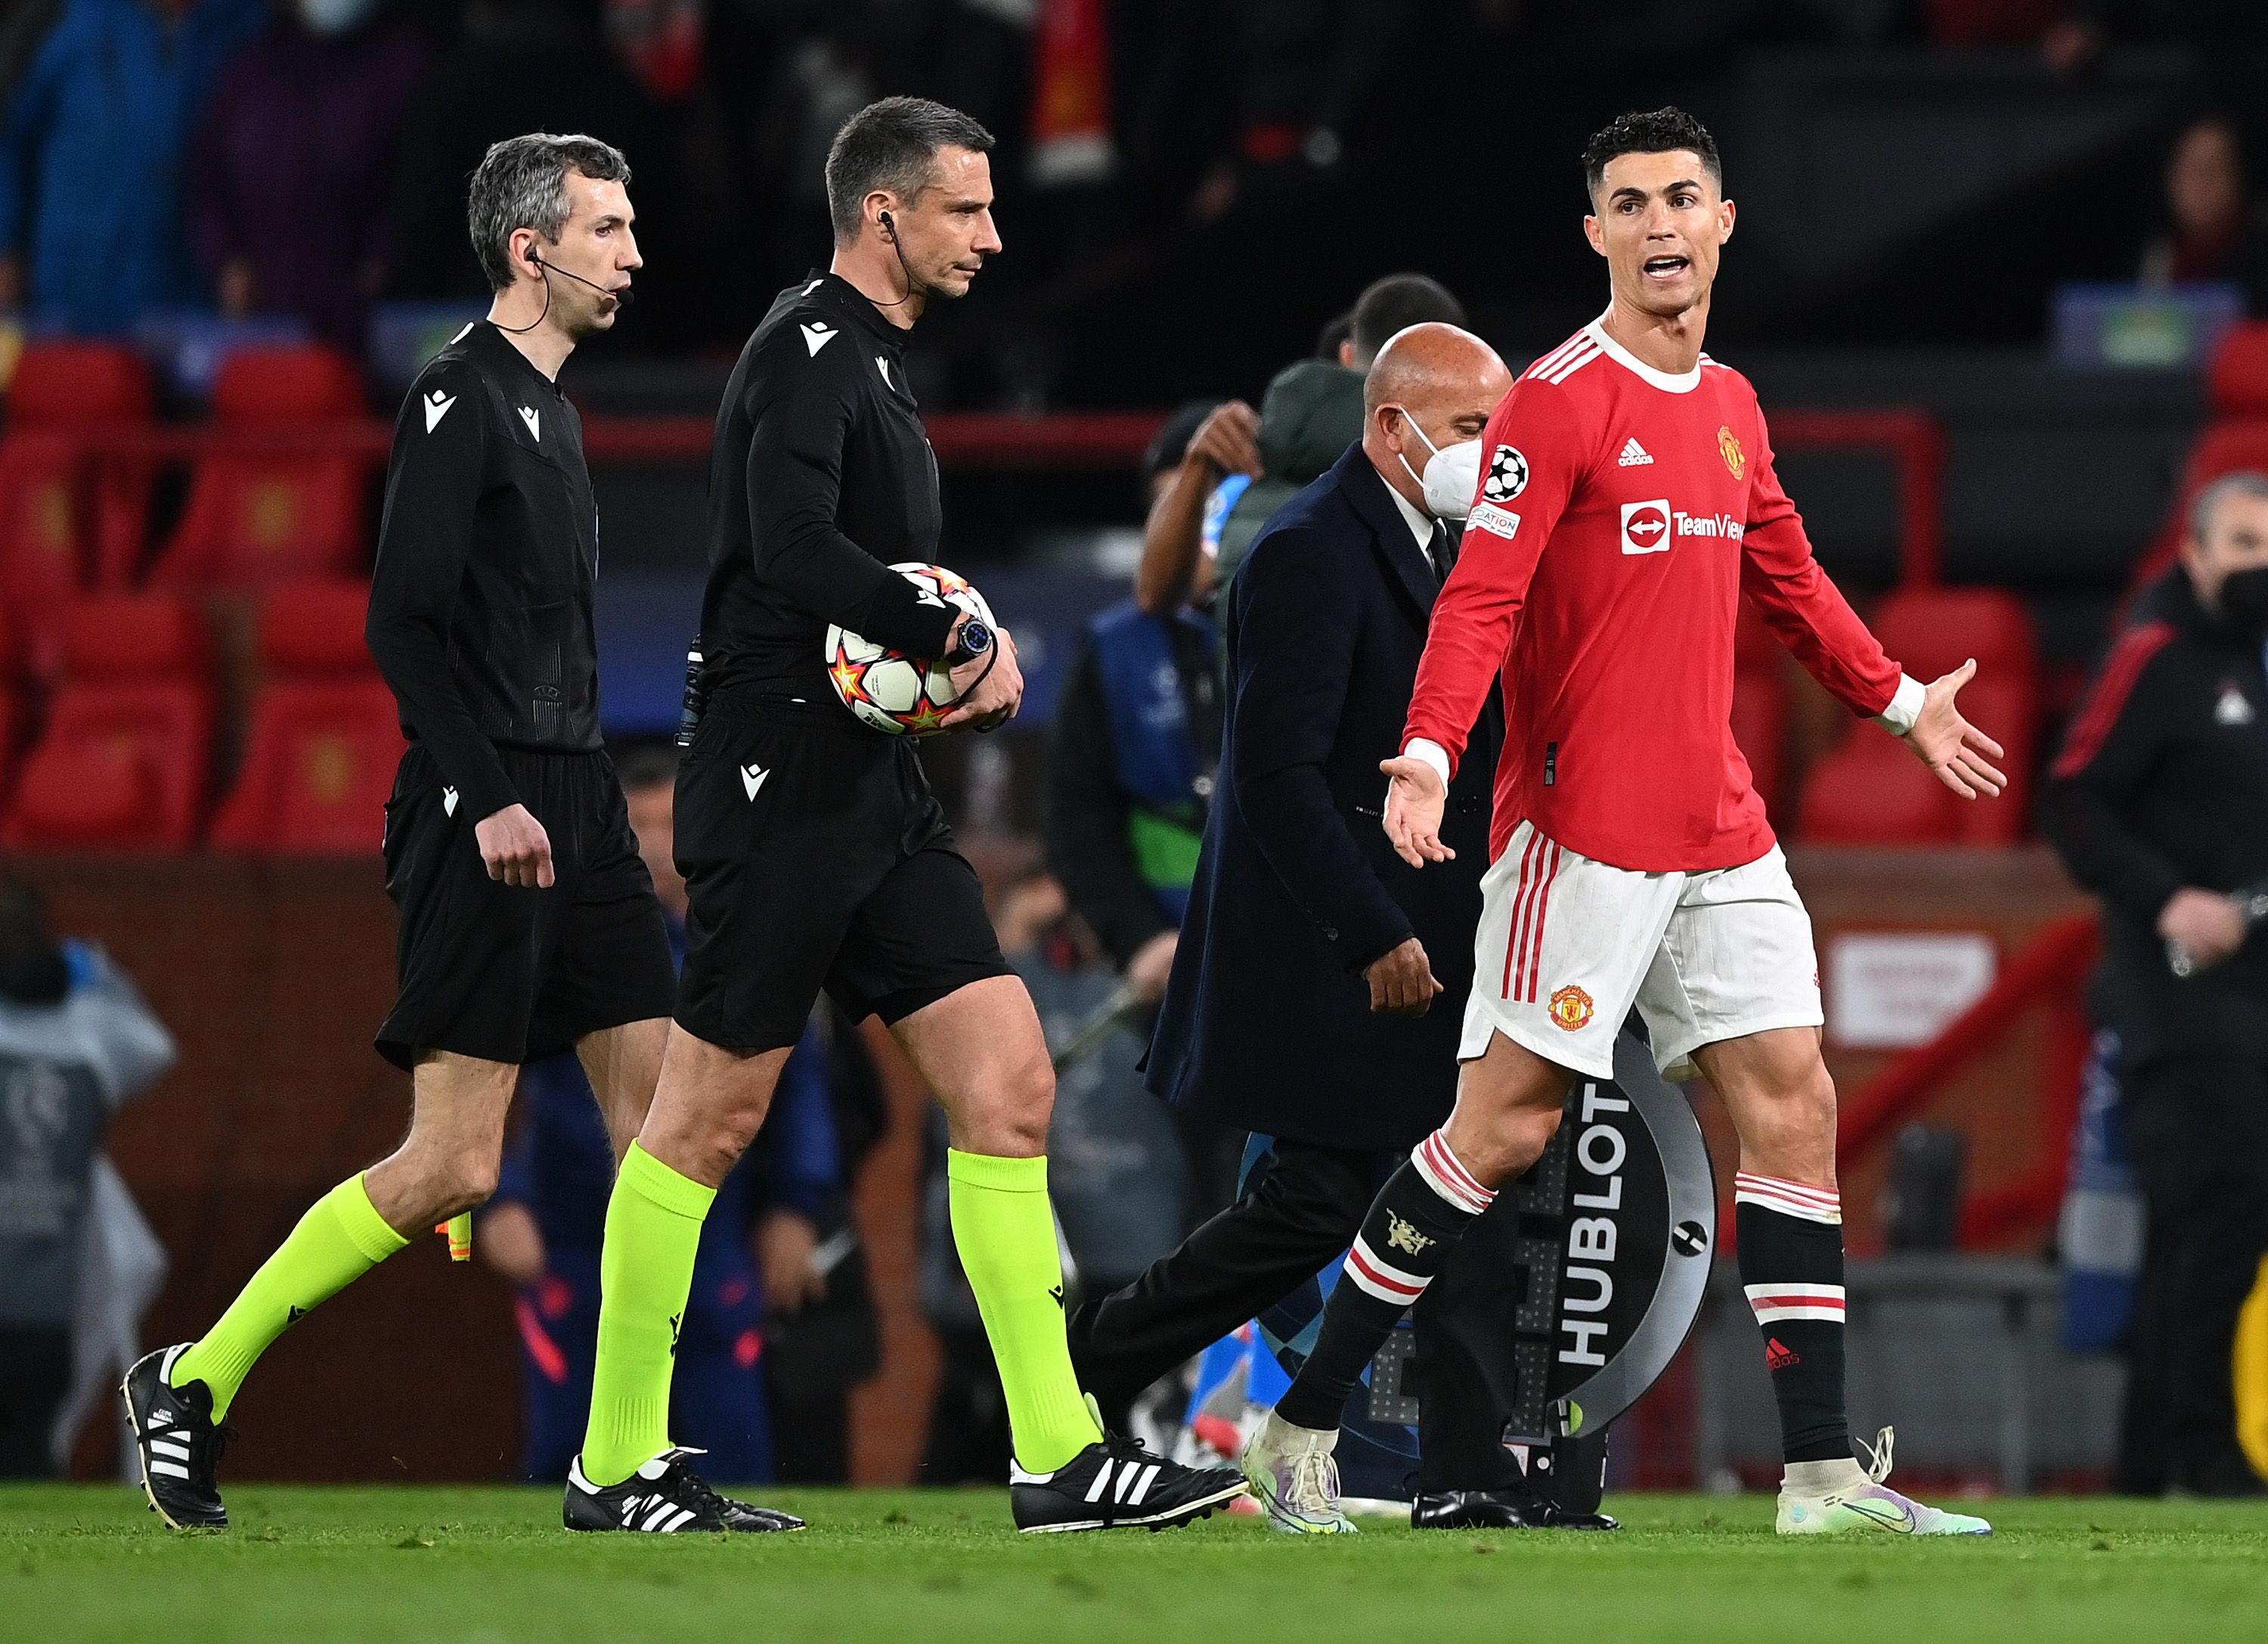 Cristiano Ronaldo protests after Man Utd are eliminated from the Champions League